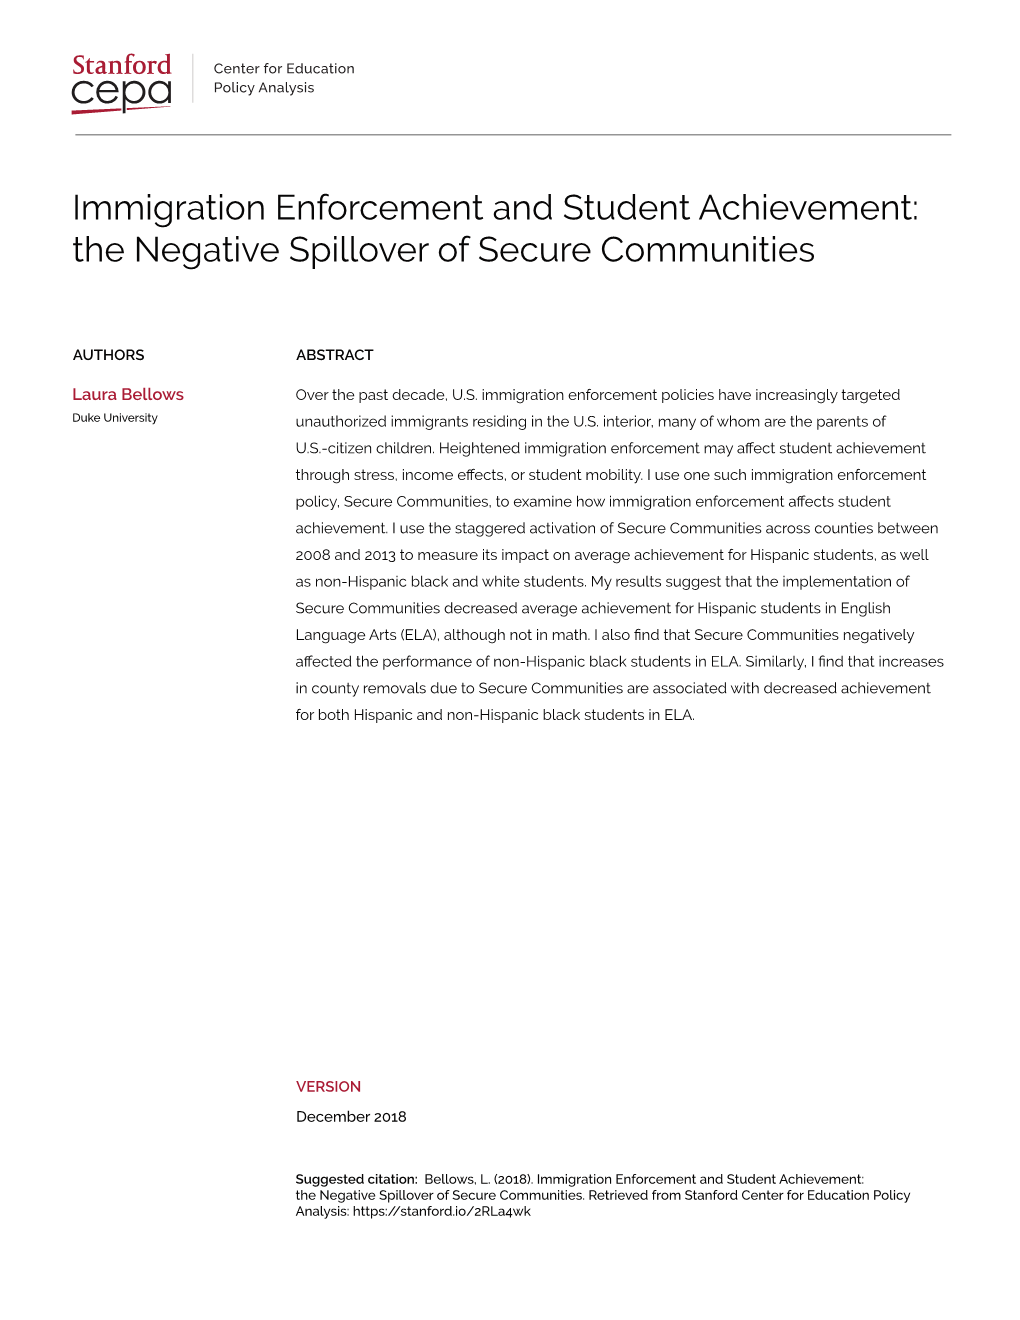 Immigration Enforcement and Student Achievement: the Negative Spillover of Secure Communities